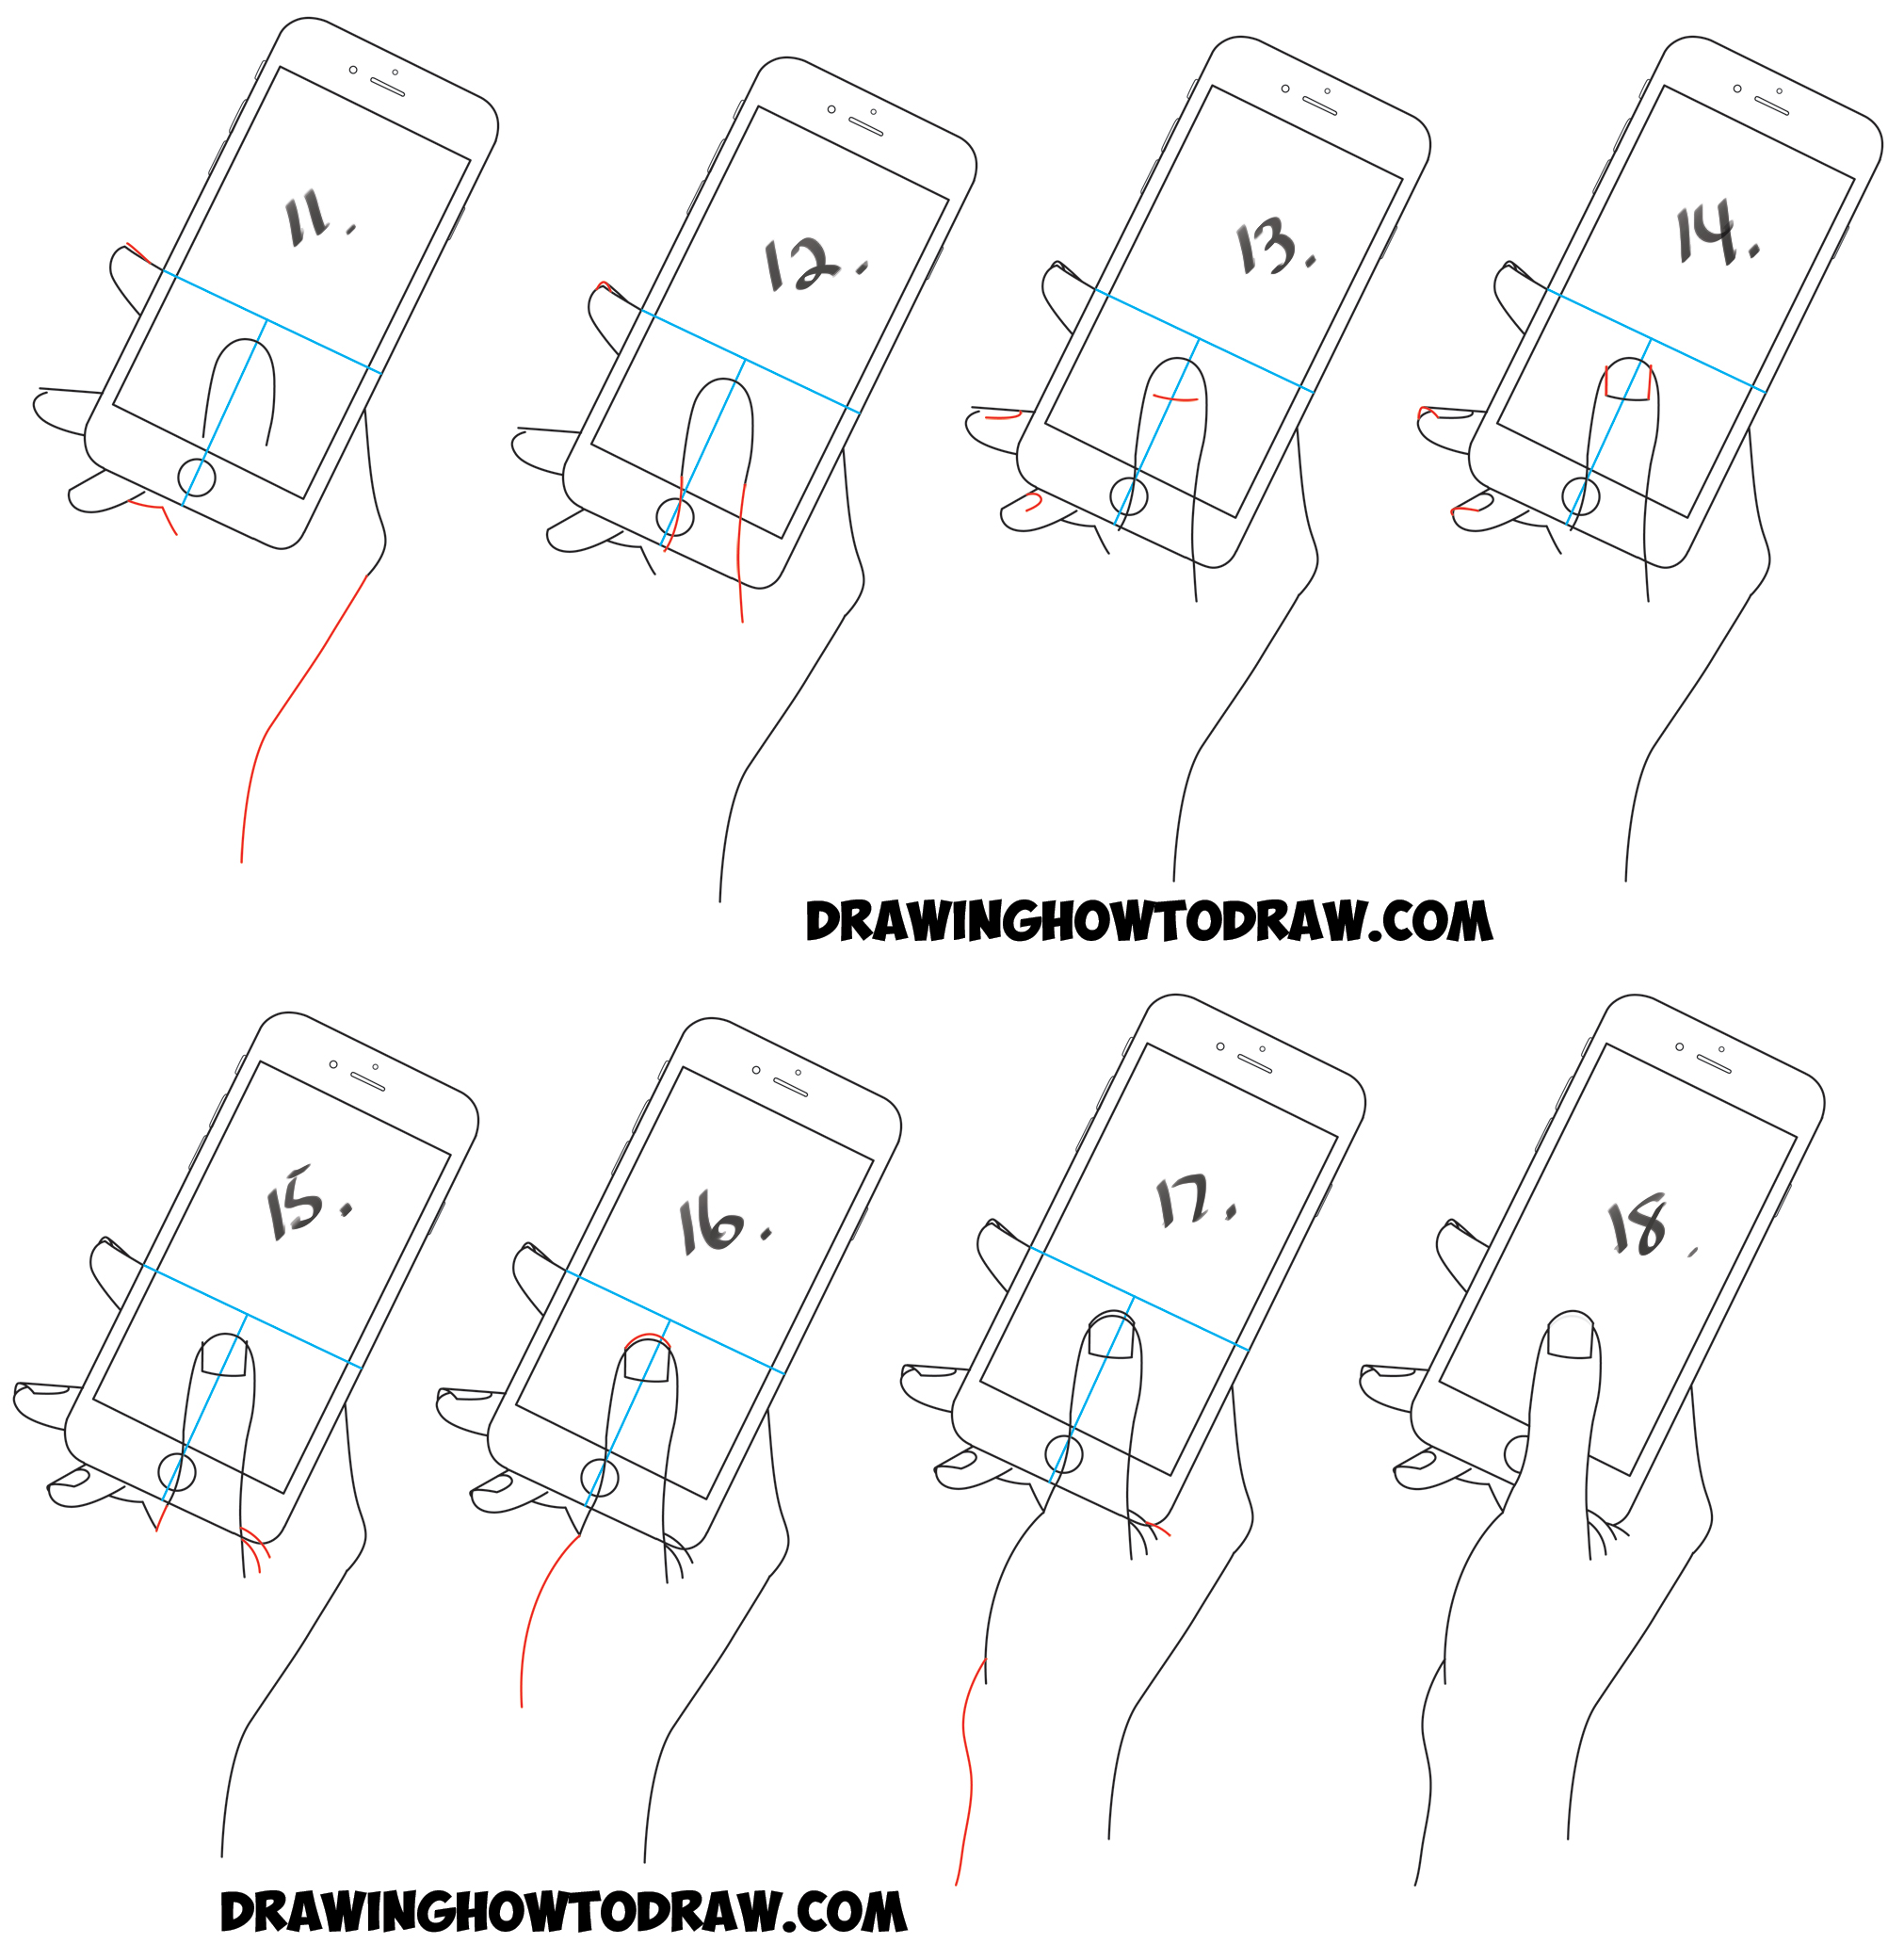 How to Draw a Hand Holding a Cell Phone / iPhone in Easy Step by Step